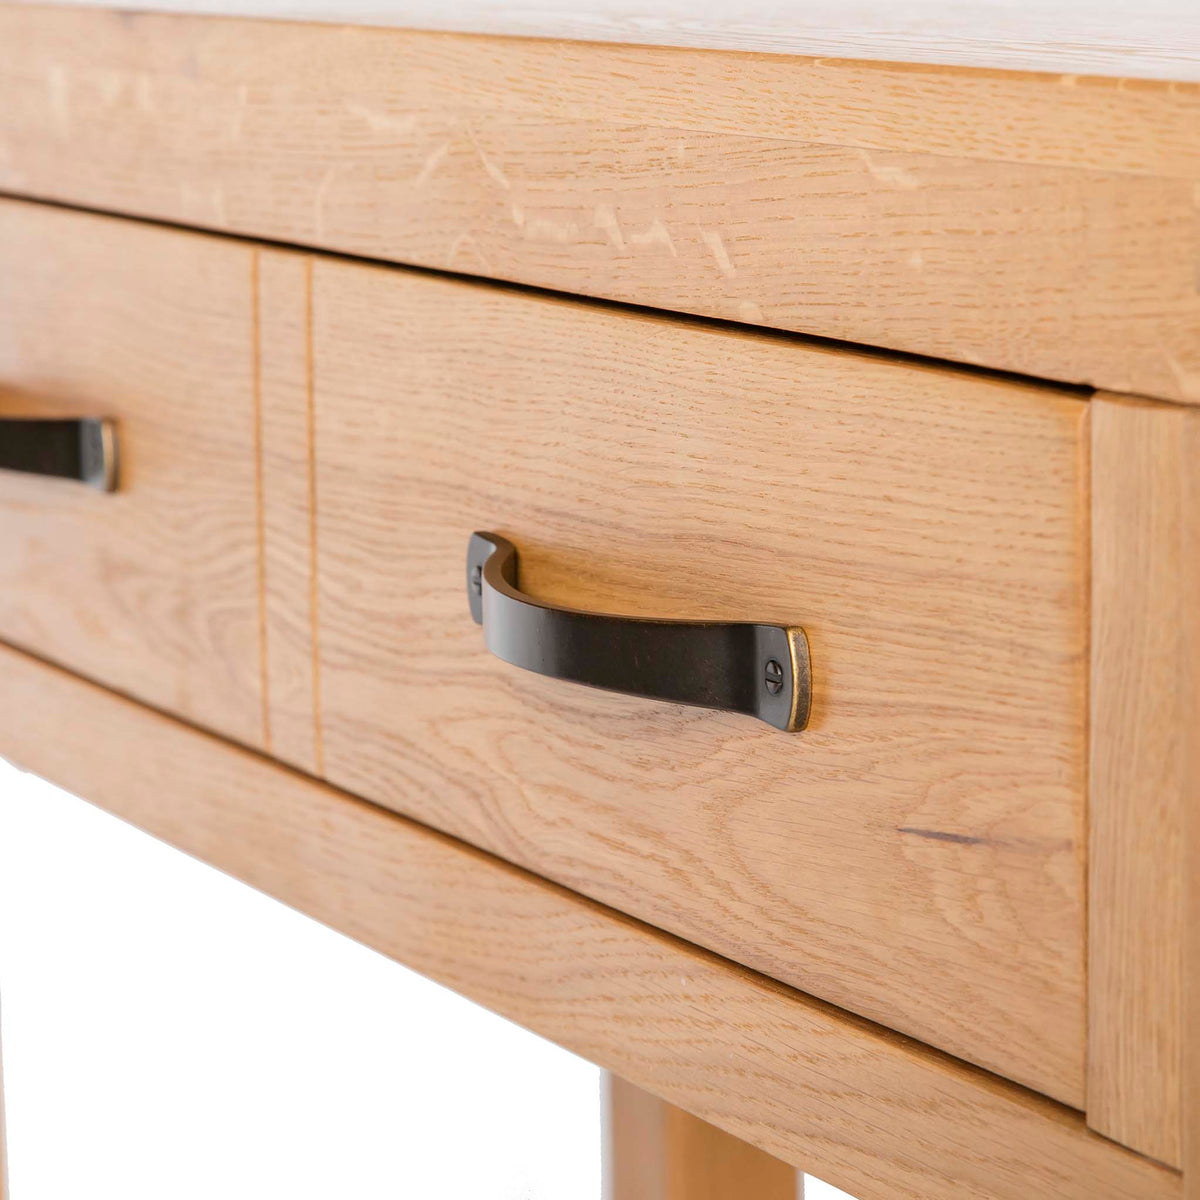  Abbey Waxed Oak Console Table with Drawer - Close up of drawer front from side